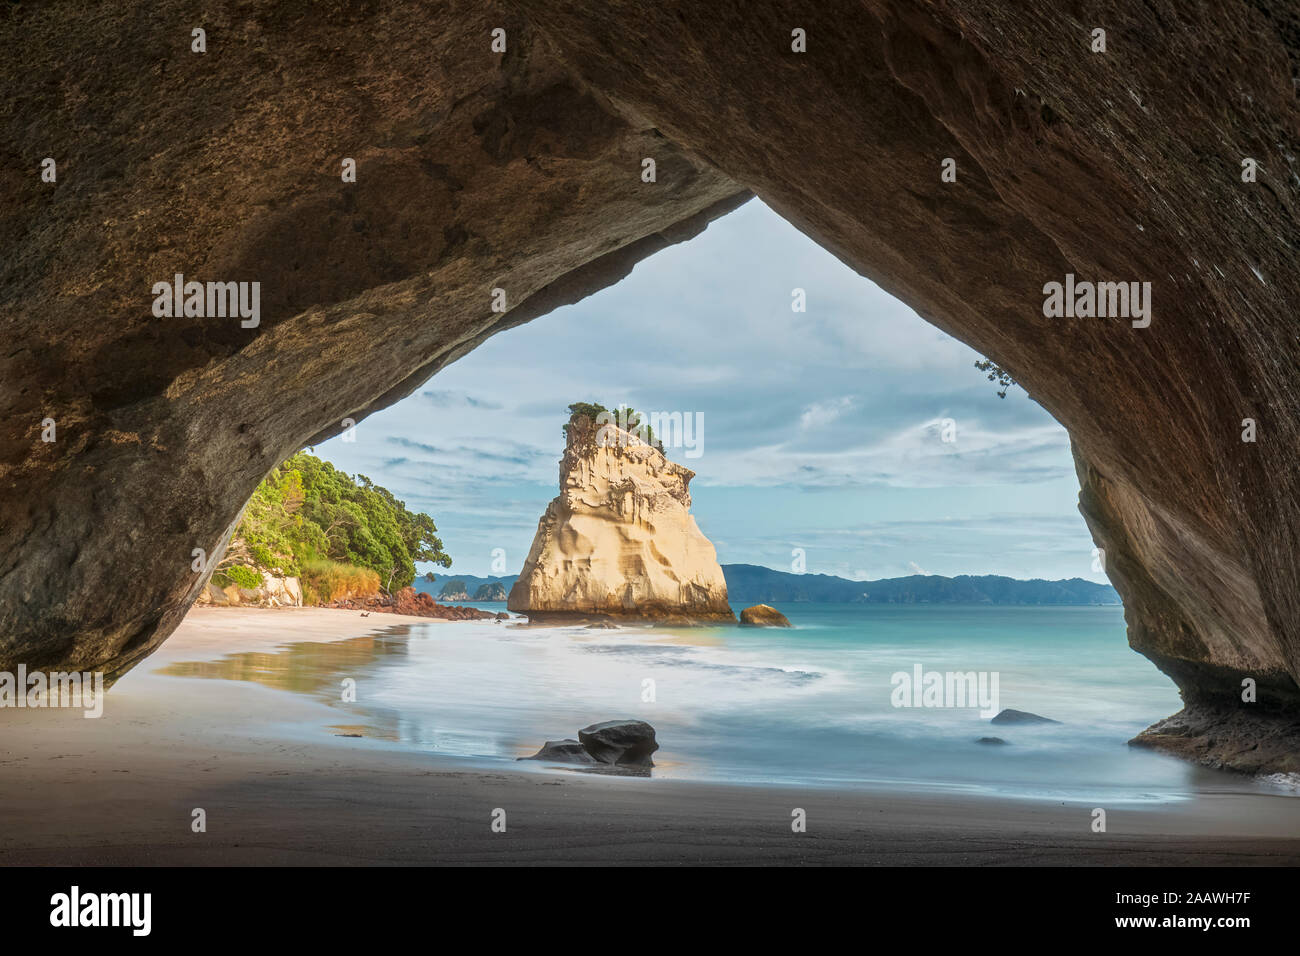 New Zealand, North Island, Waikato, Te Hoho Rock seen from under natural arch in Cathedral Cove Stock Photo